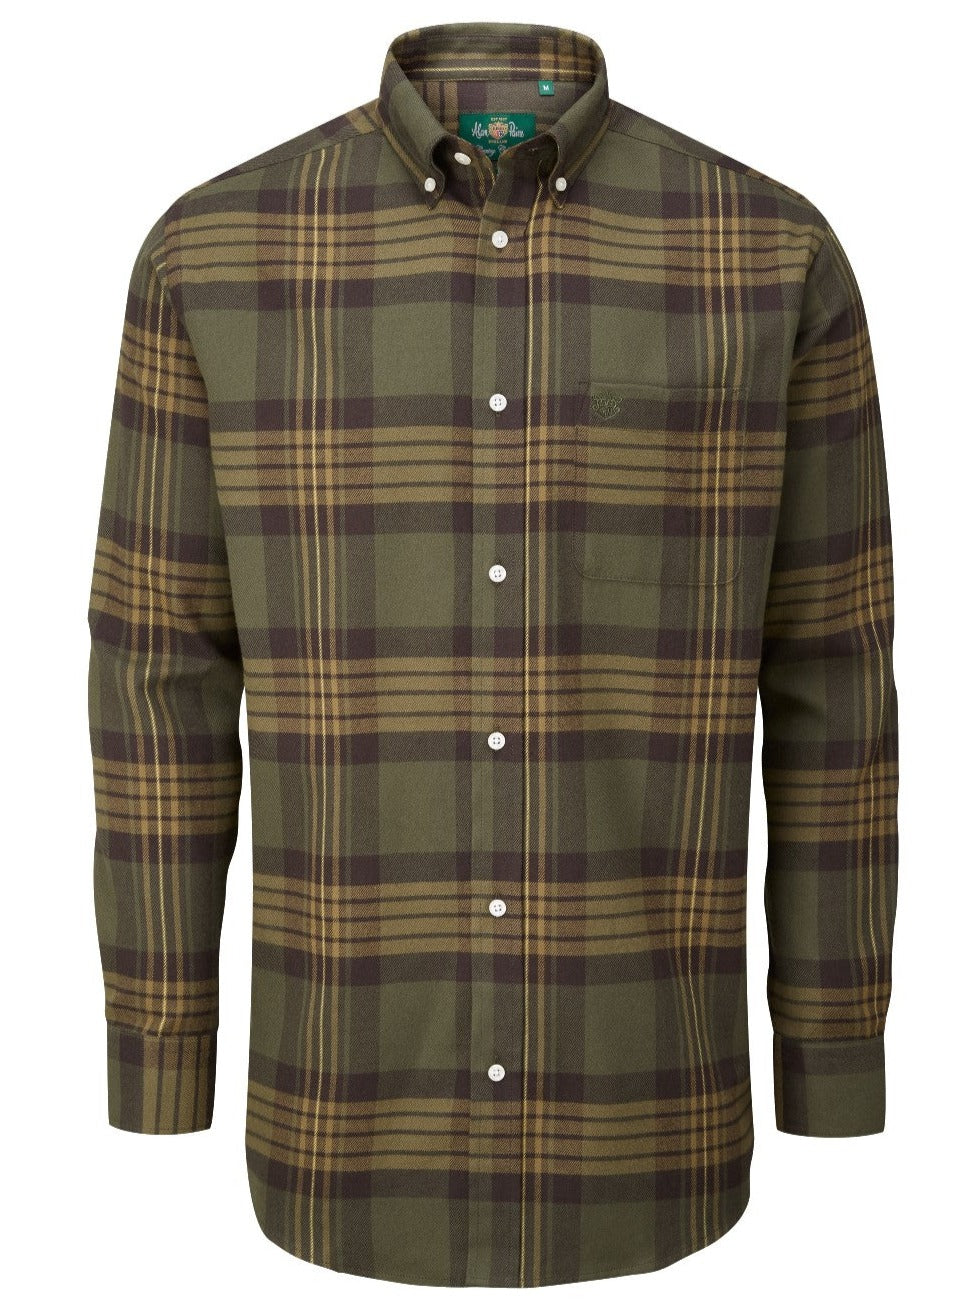 Alan Paine Ilkley Flannel Button-Down Collar Shirt - Olive 